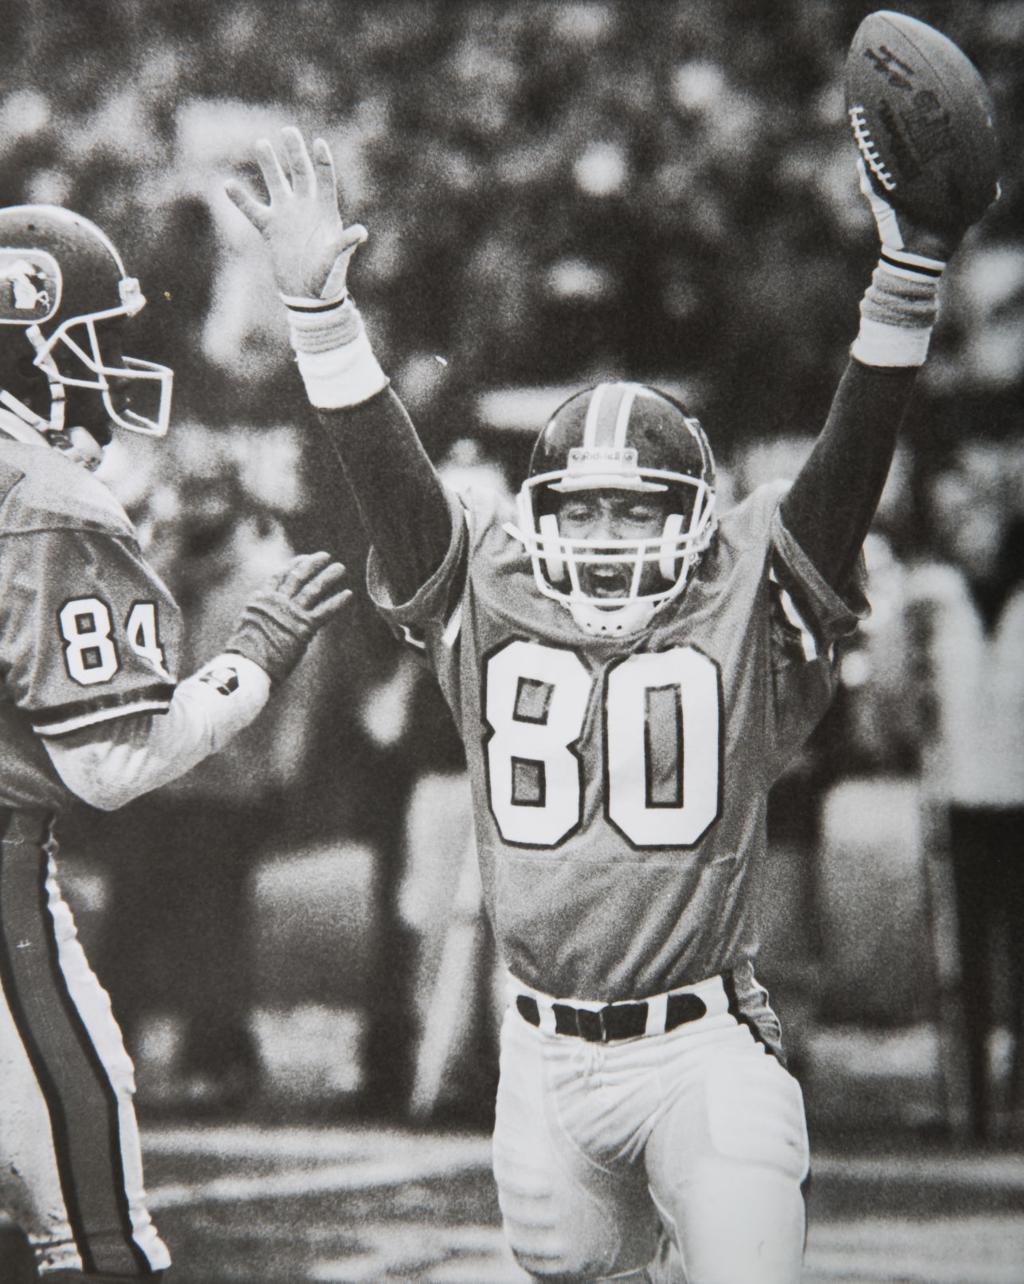 David Ramsey: 30 years ago, Broncos' John Elway led a drive that became The  Drive, Sports